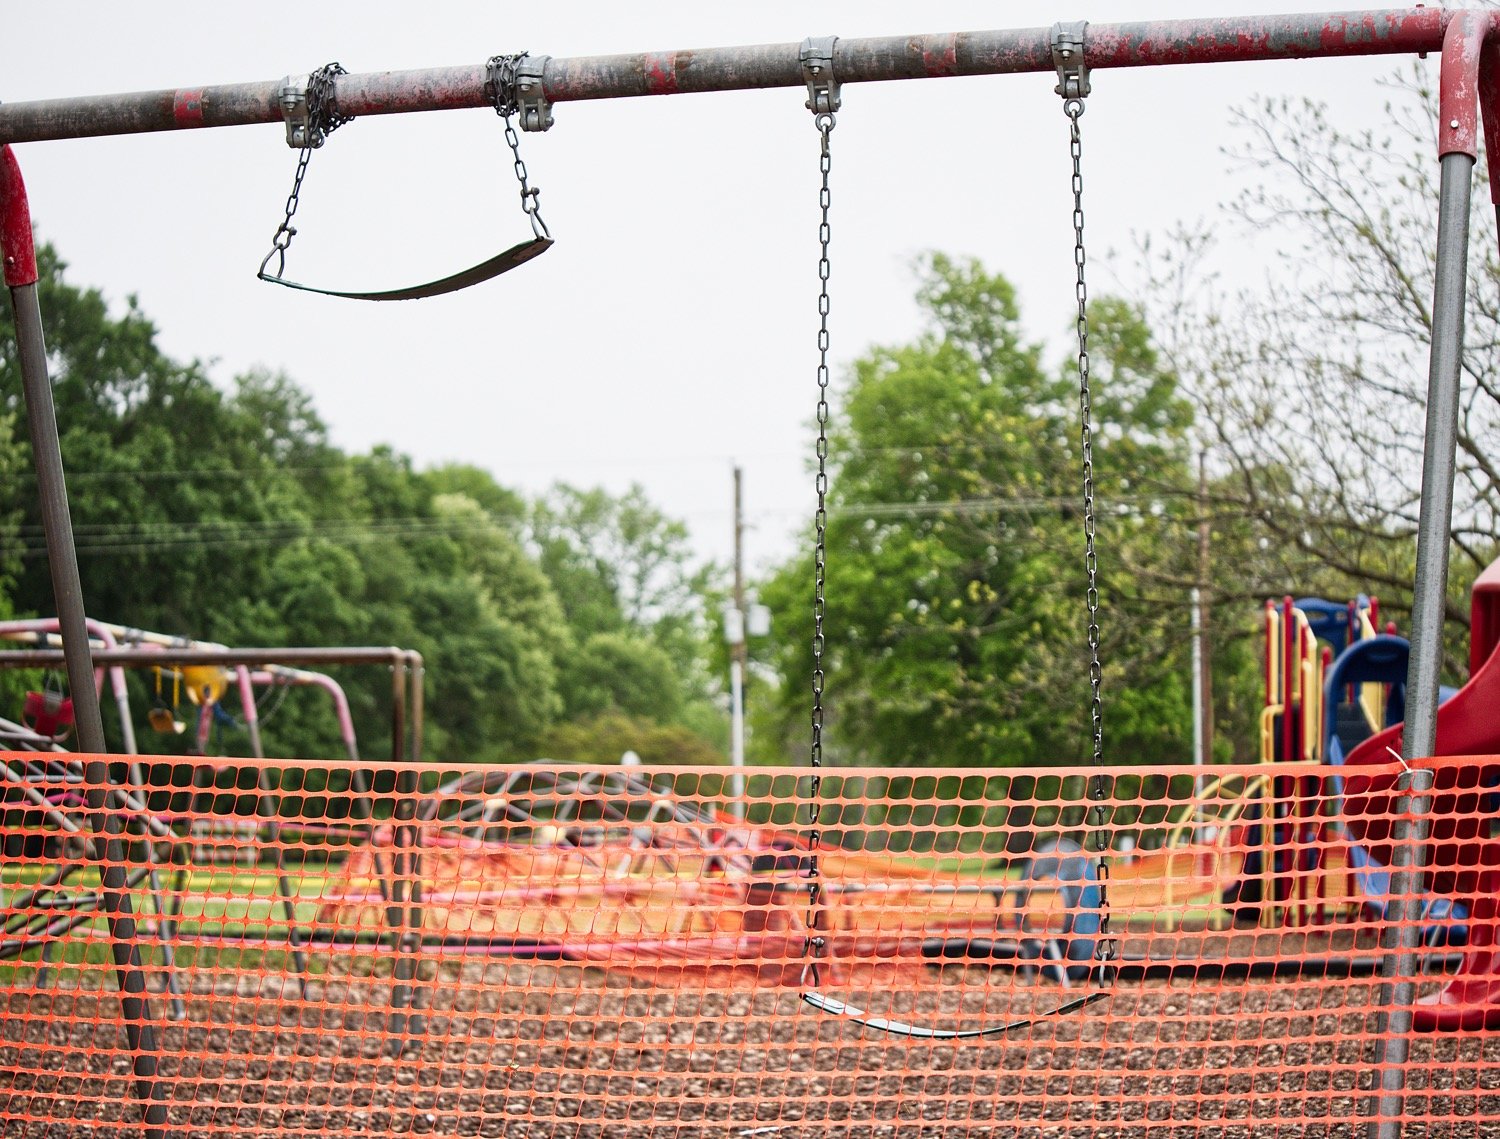 The city of Mineola jumped in late last week to close off all playground equipment in city parks, though the parks remained open for recreation as long as social distancing was followed.